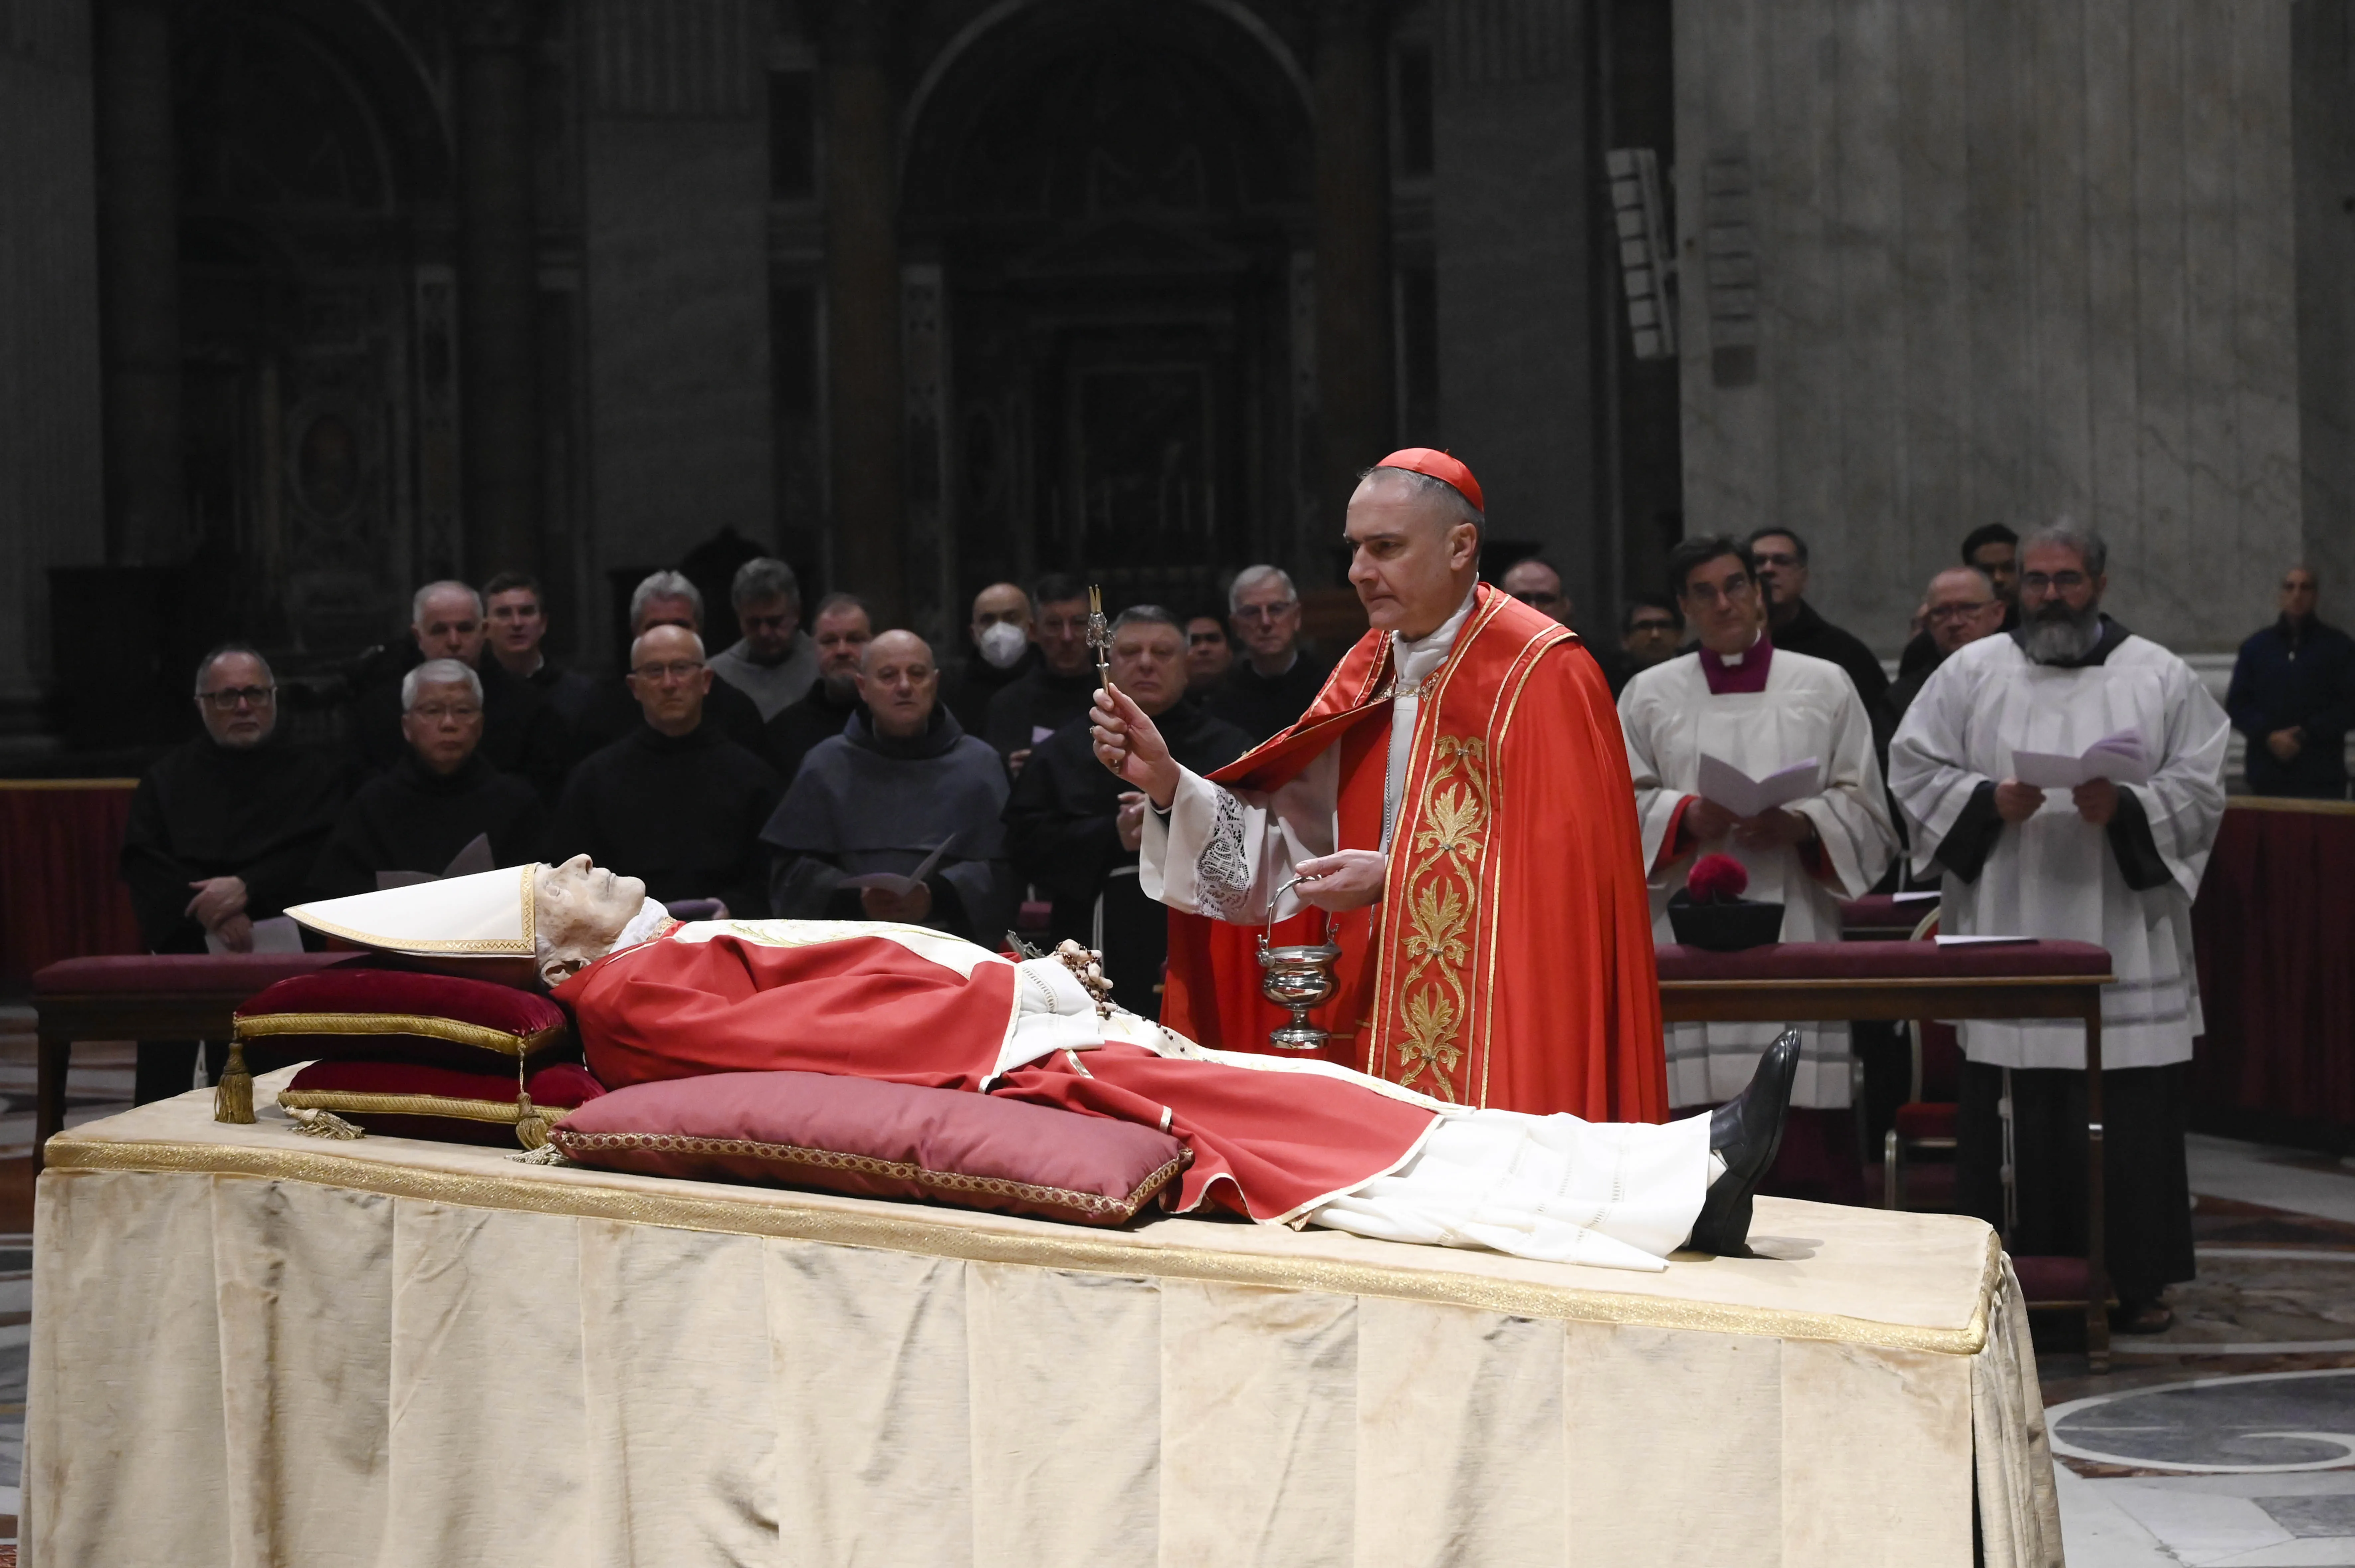 Cardinal Mauro Gambetti, the archpriest of St. Peter’s Basilica, presided over a brief ritual upon the arrival of Benedict XVI’s body in St. Peter's Basilica on Jan. 2, 2023, sprinkling the body with holy water and offering prayers for the repose of his soul. . Vatican Media